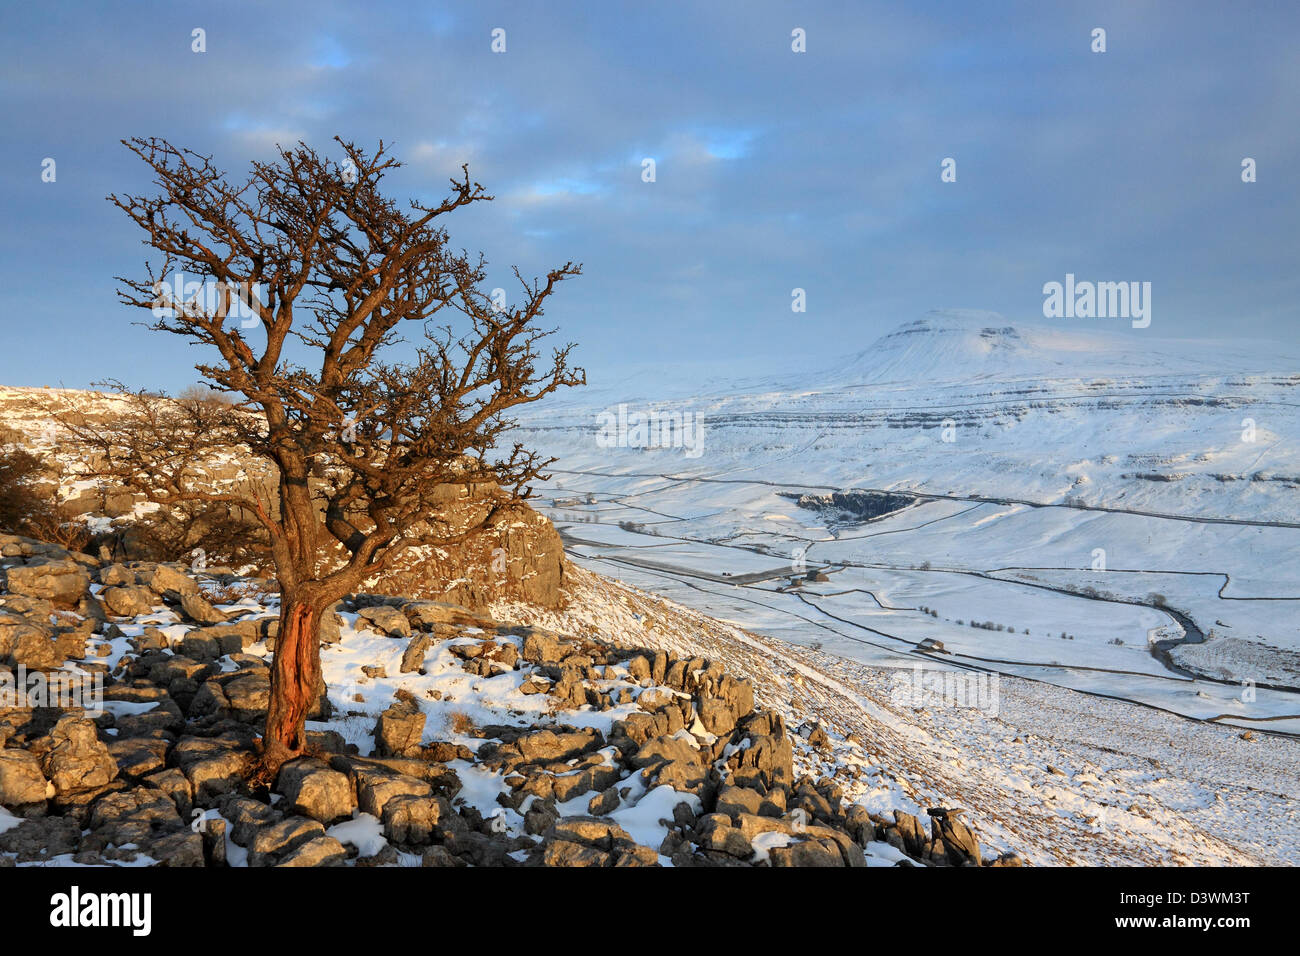 A snowy, wintertime view of a tree on the limestone pavement at Twistleton Scars, in the Yorkshire Dales National Park, England Stock Photo